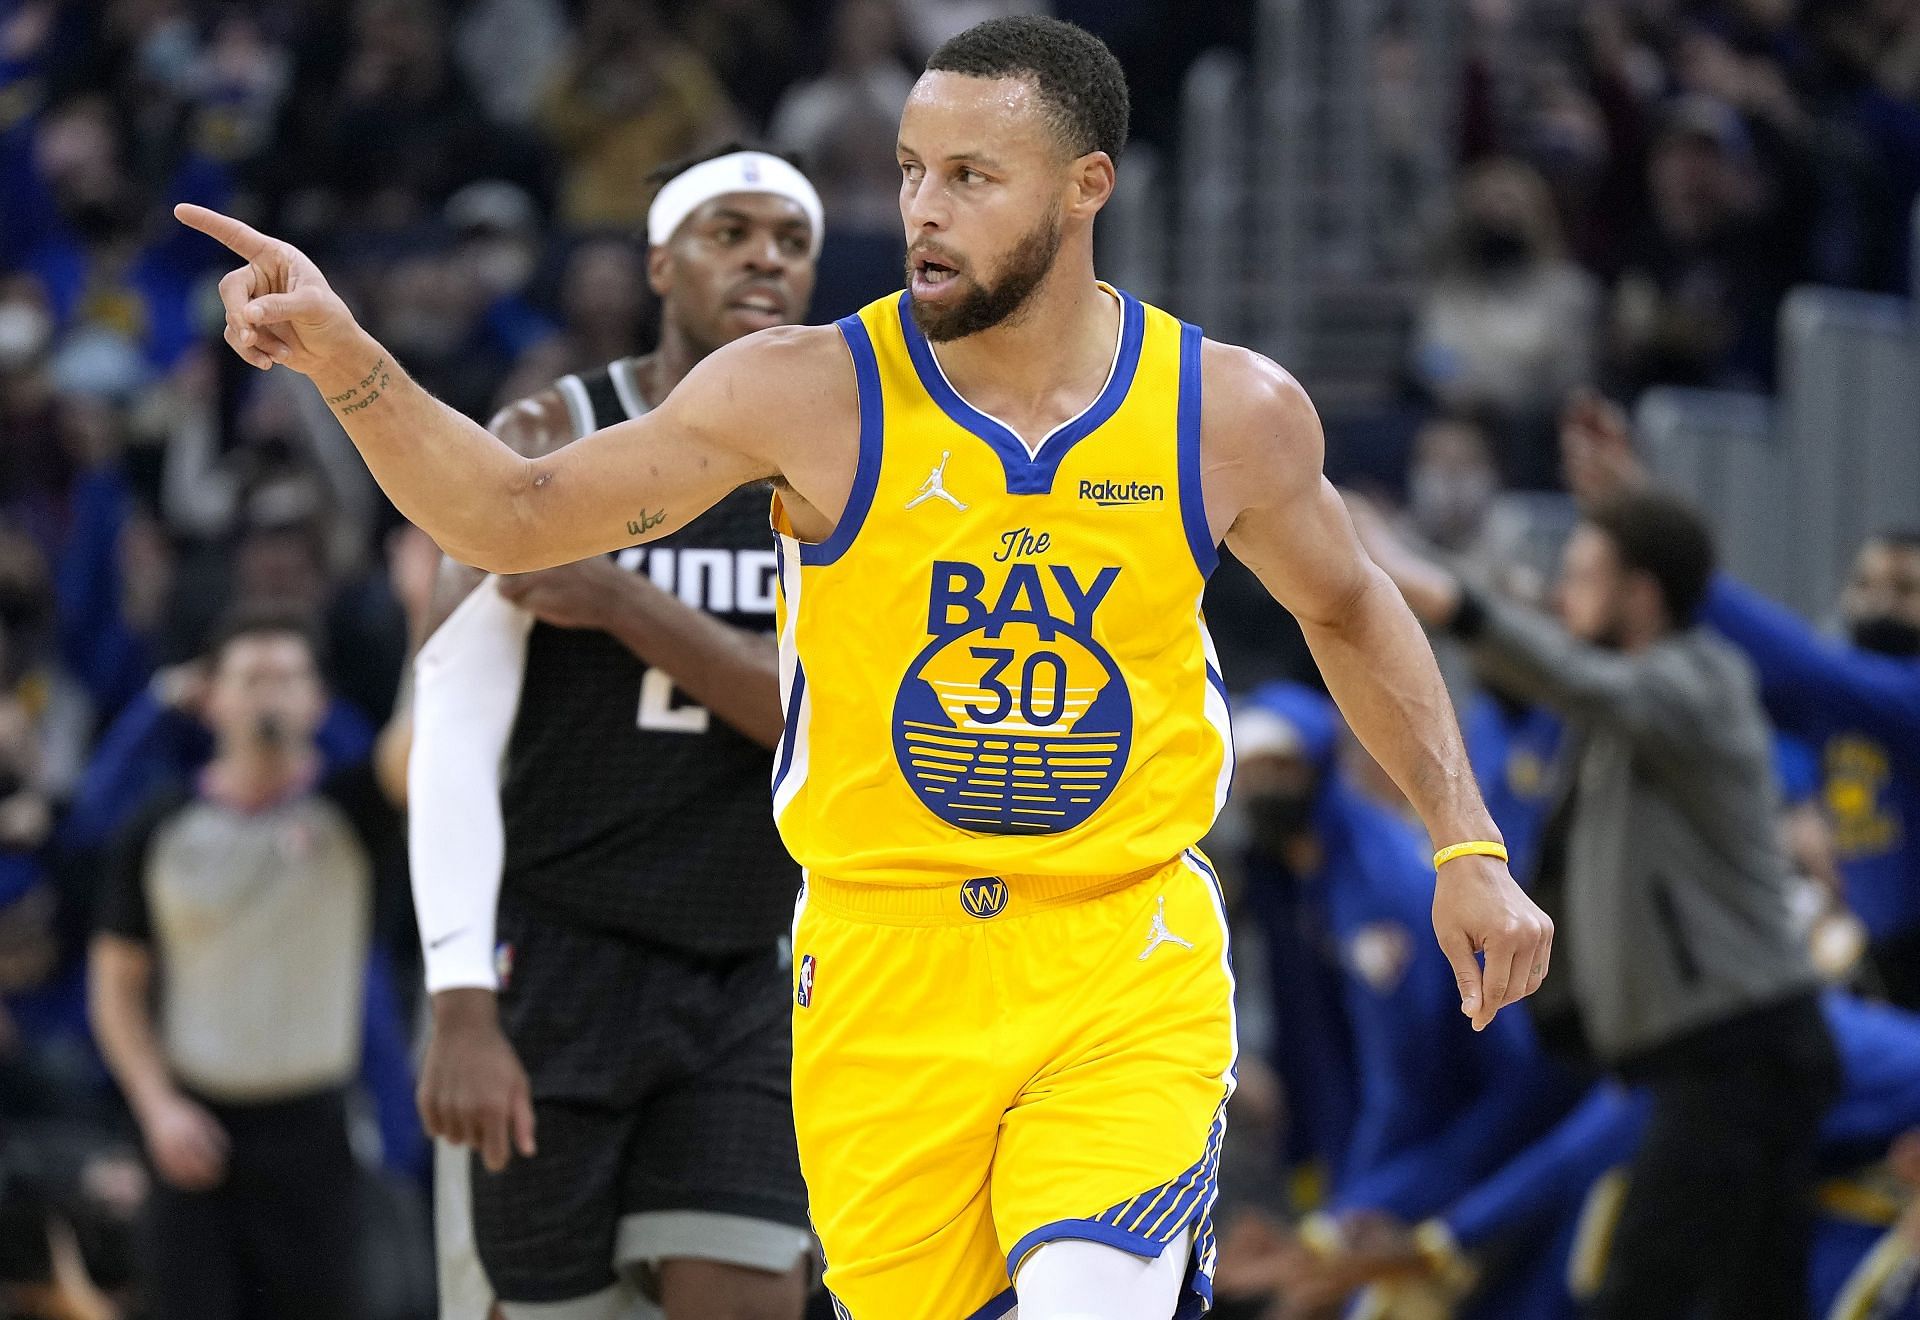 Stephen Curry #30 of the Golden State Warriors reacts after making a three-point shot against the Sacramento Kings during the first quarter at Chase Center on December 20, 2021 in San Francisco, California.